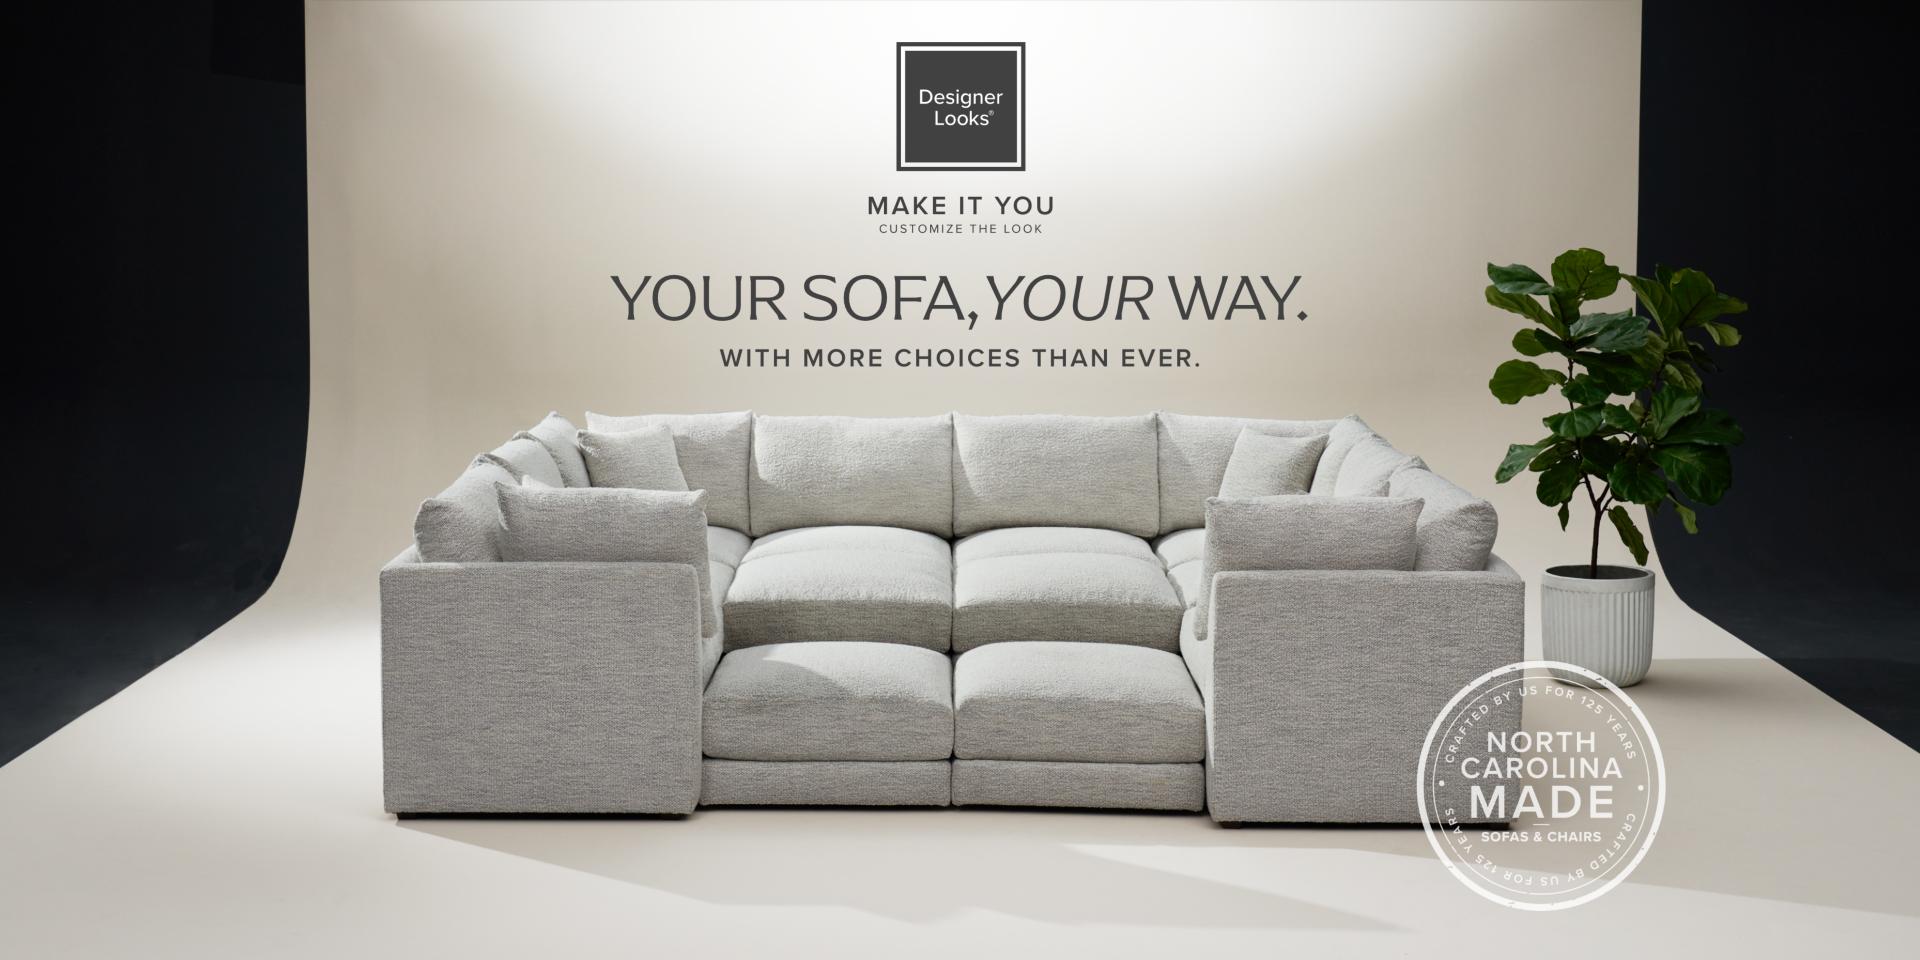 Designer Looks - Make It You (Customize the looks) Your Sofa, Your Way with more choices than ever - start customizing